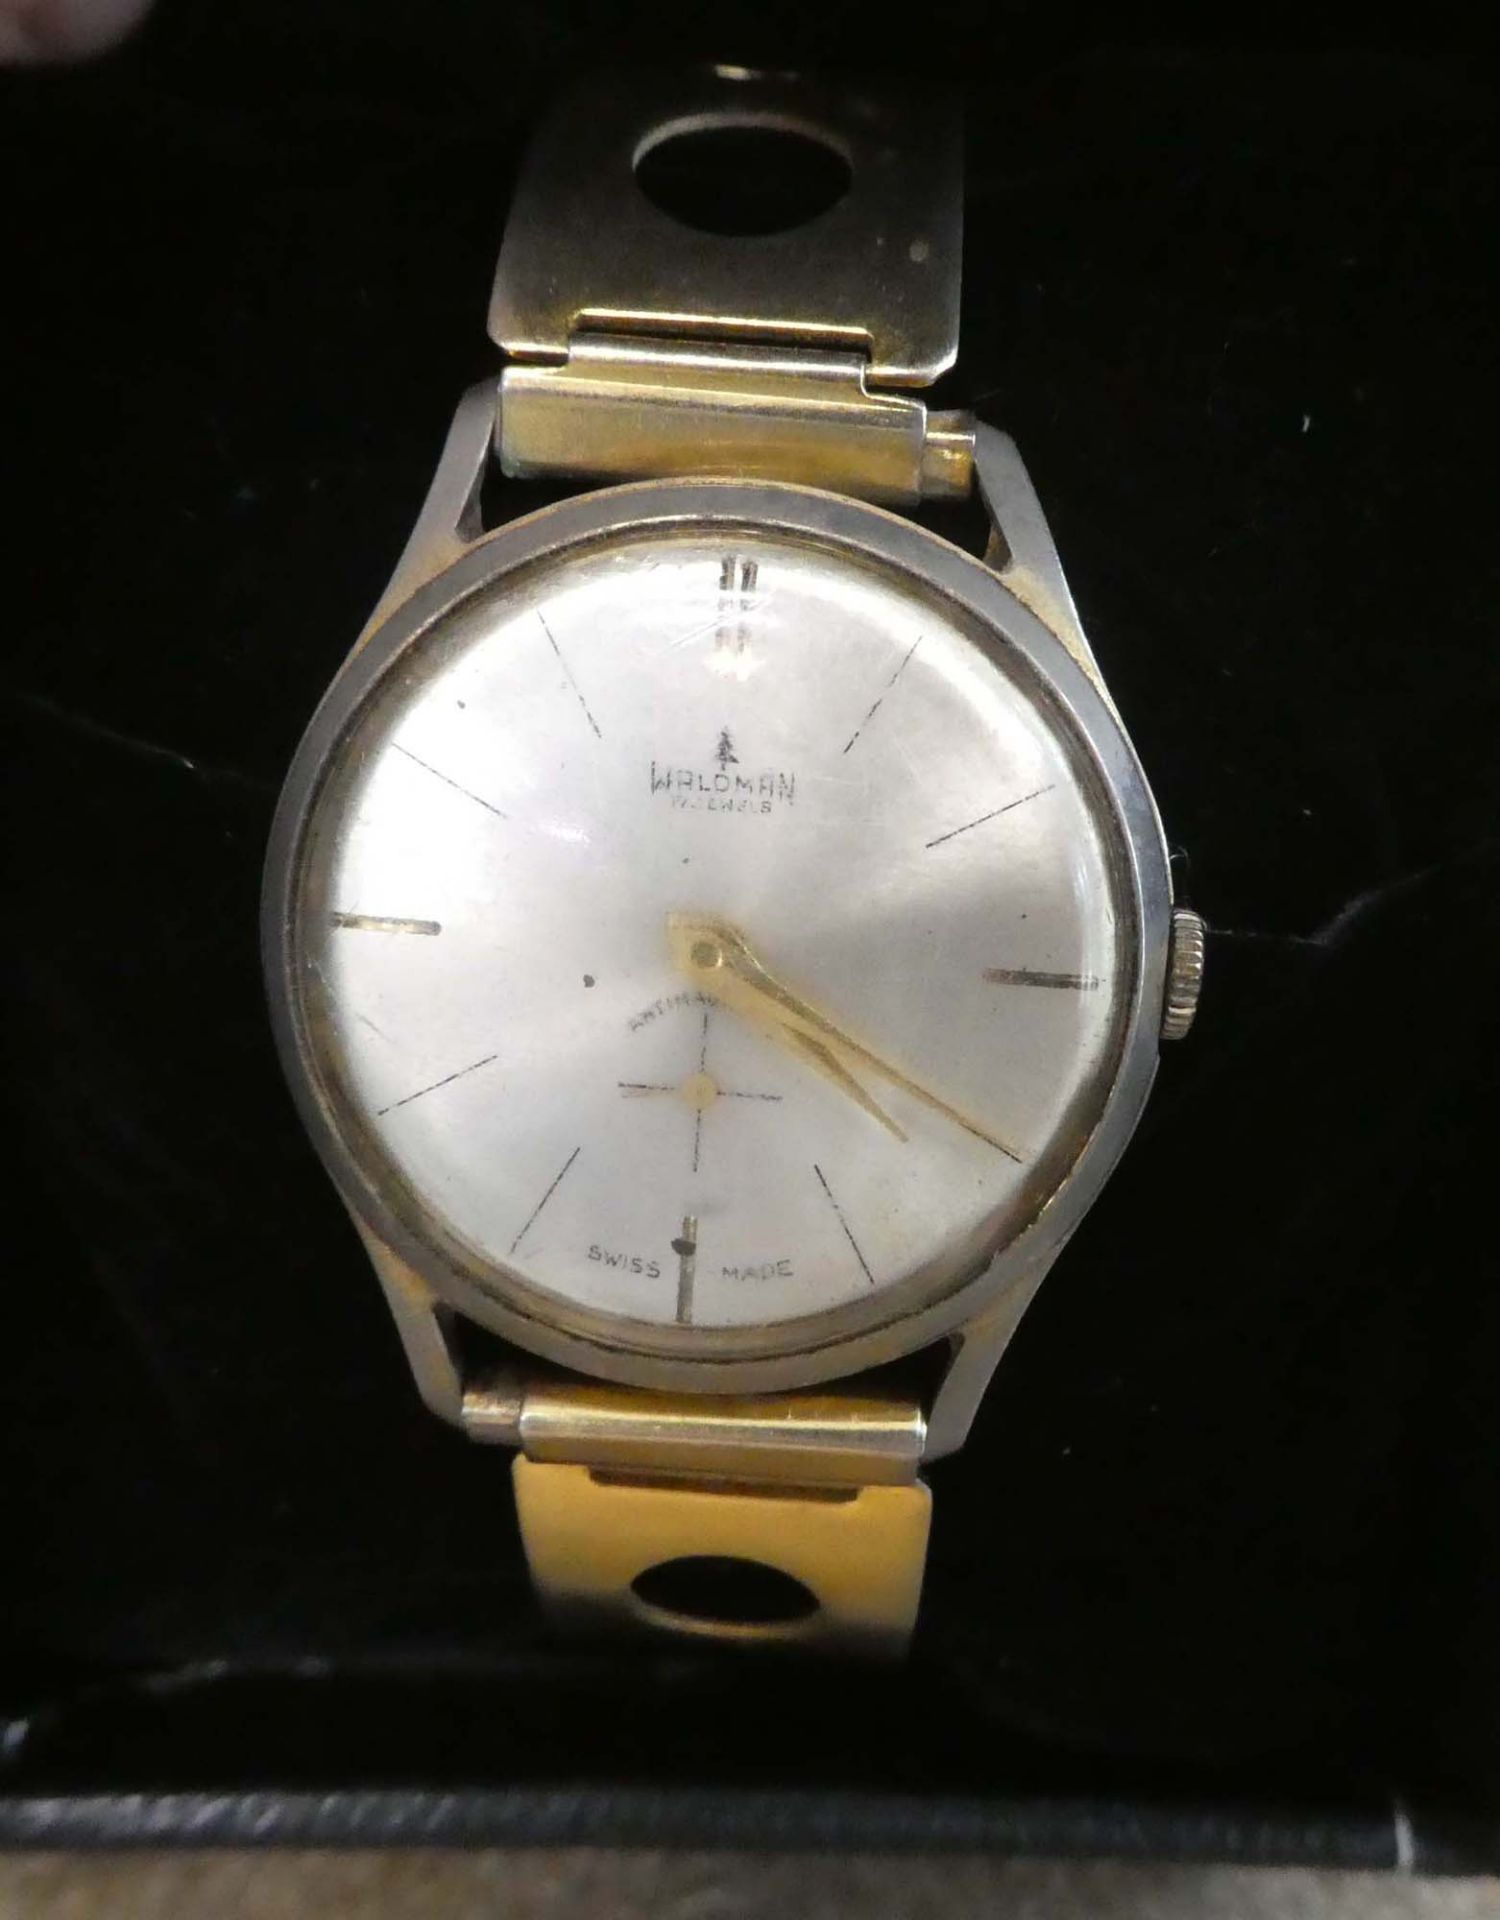 Gents Swiss made stainless steel strap watch with box